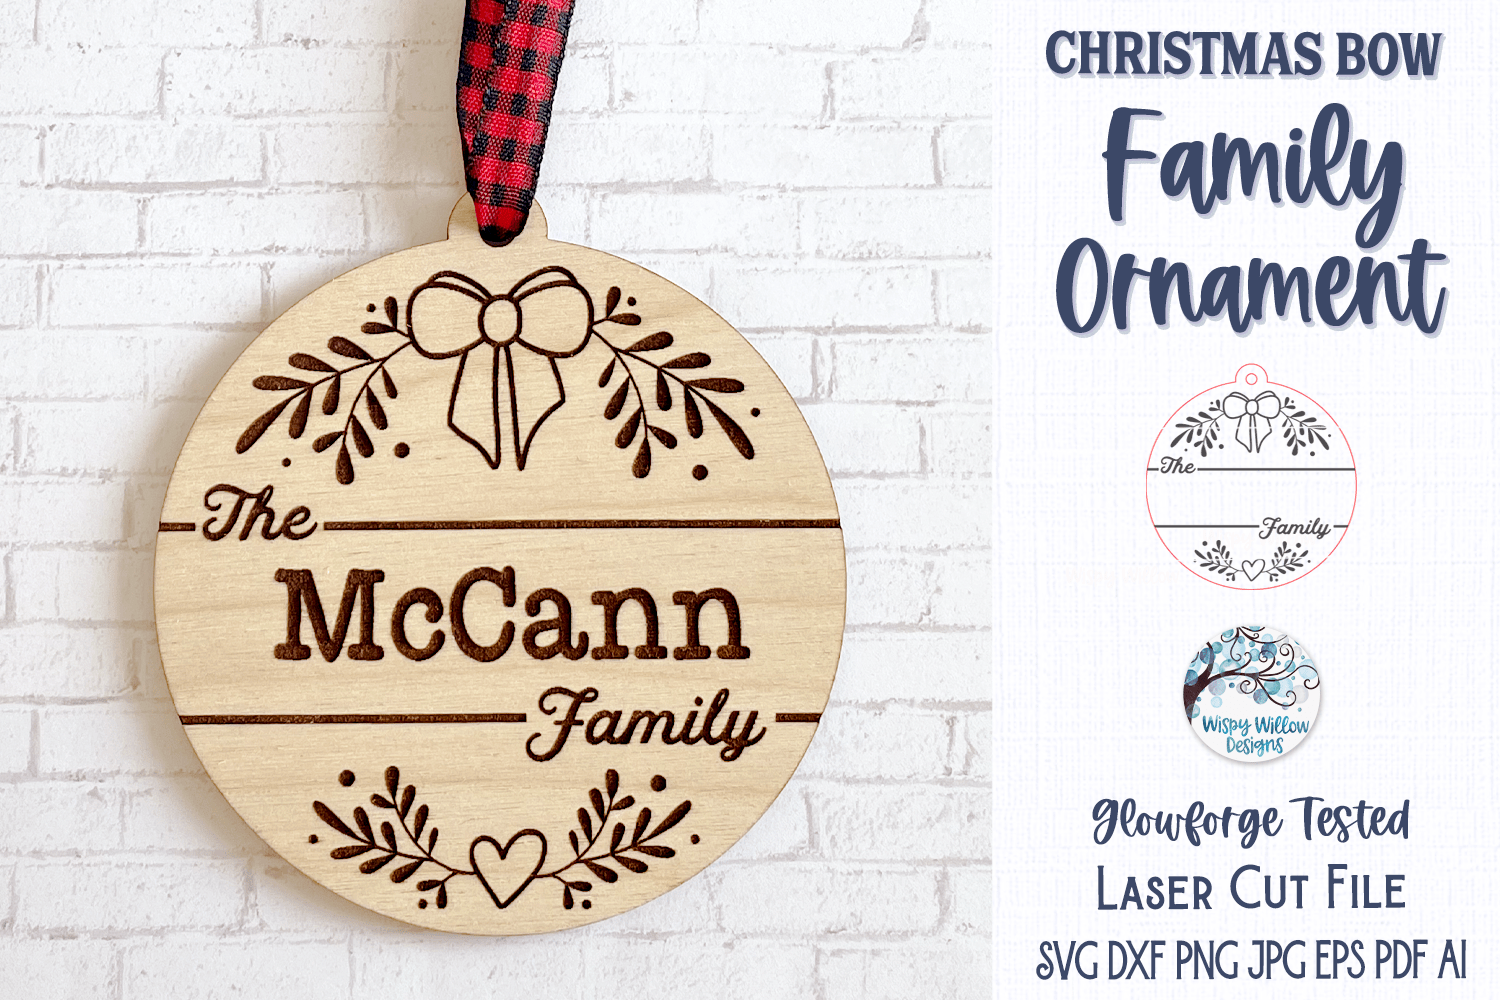 Christmas Bow Family Ornament for Glowforge or Laser Cutter Wispy Willow Designs Company